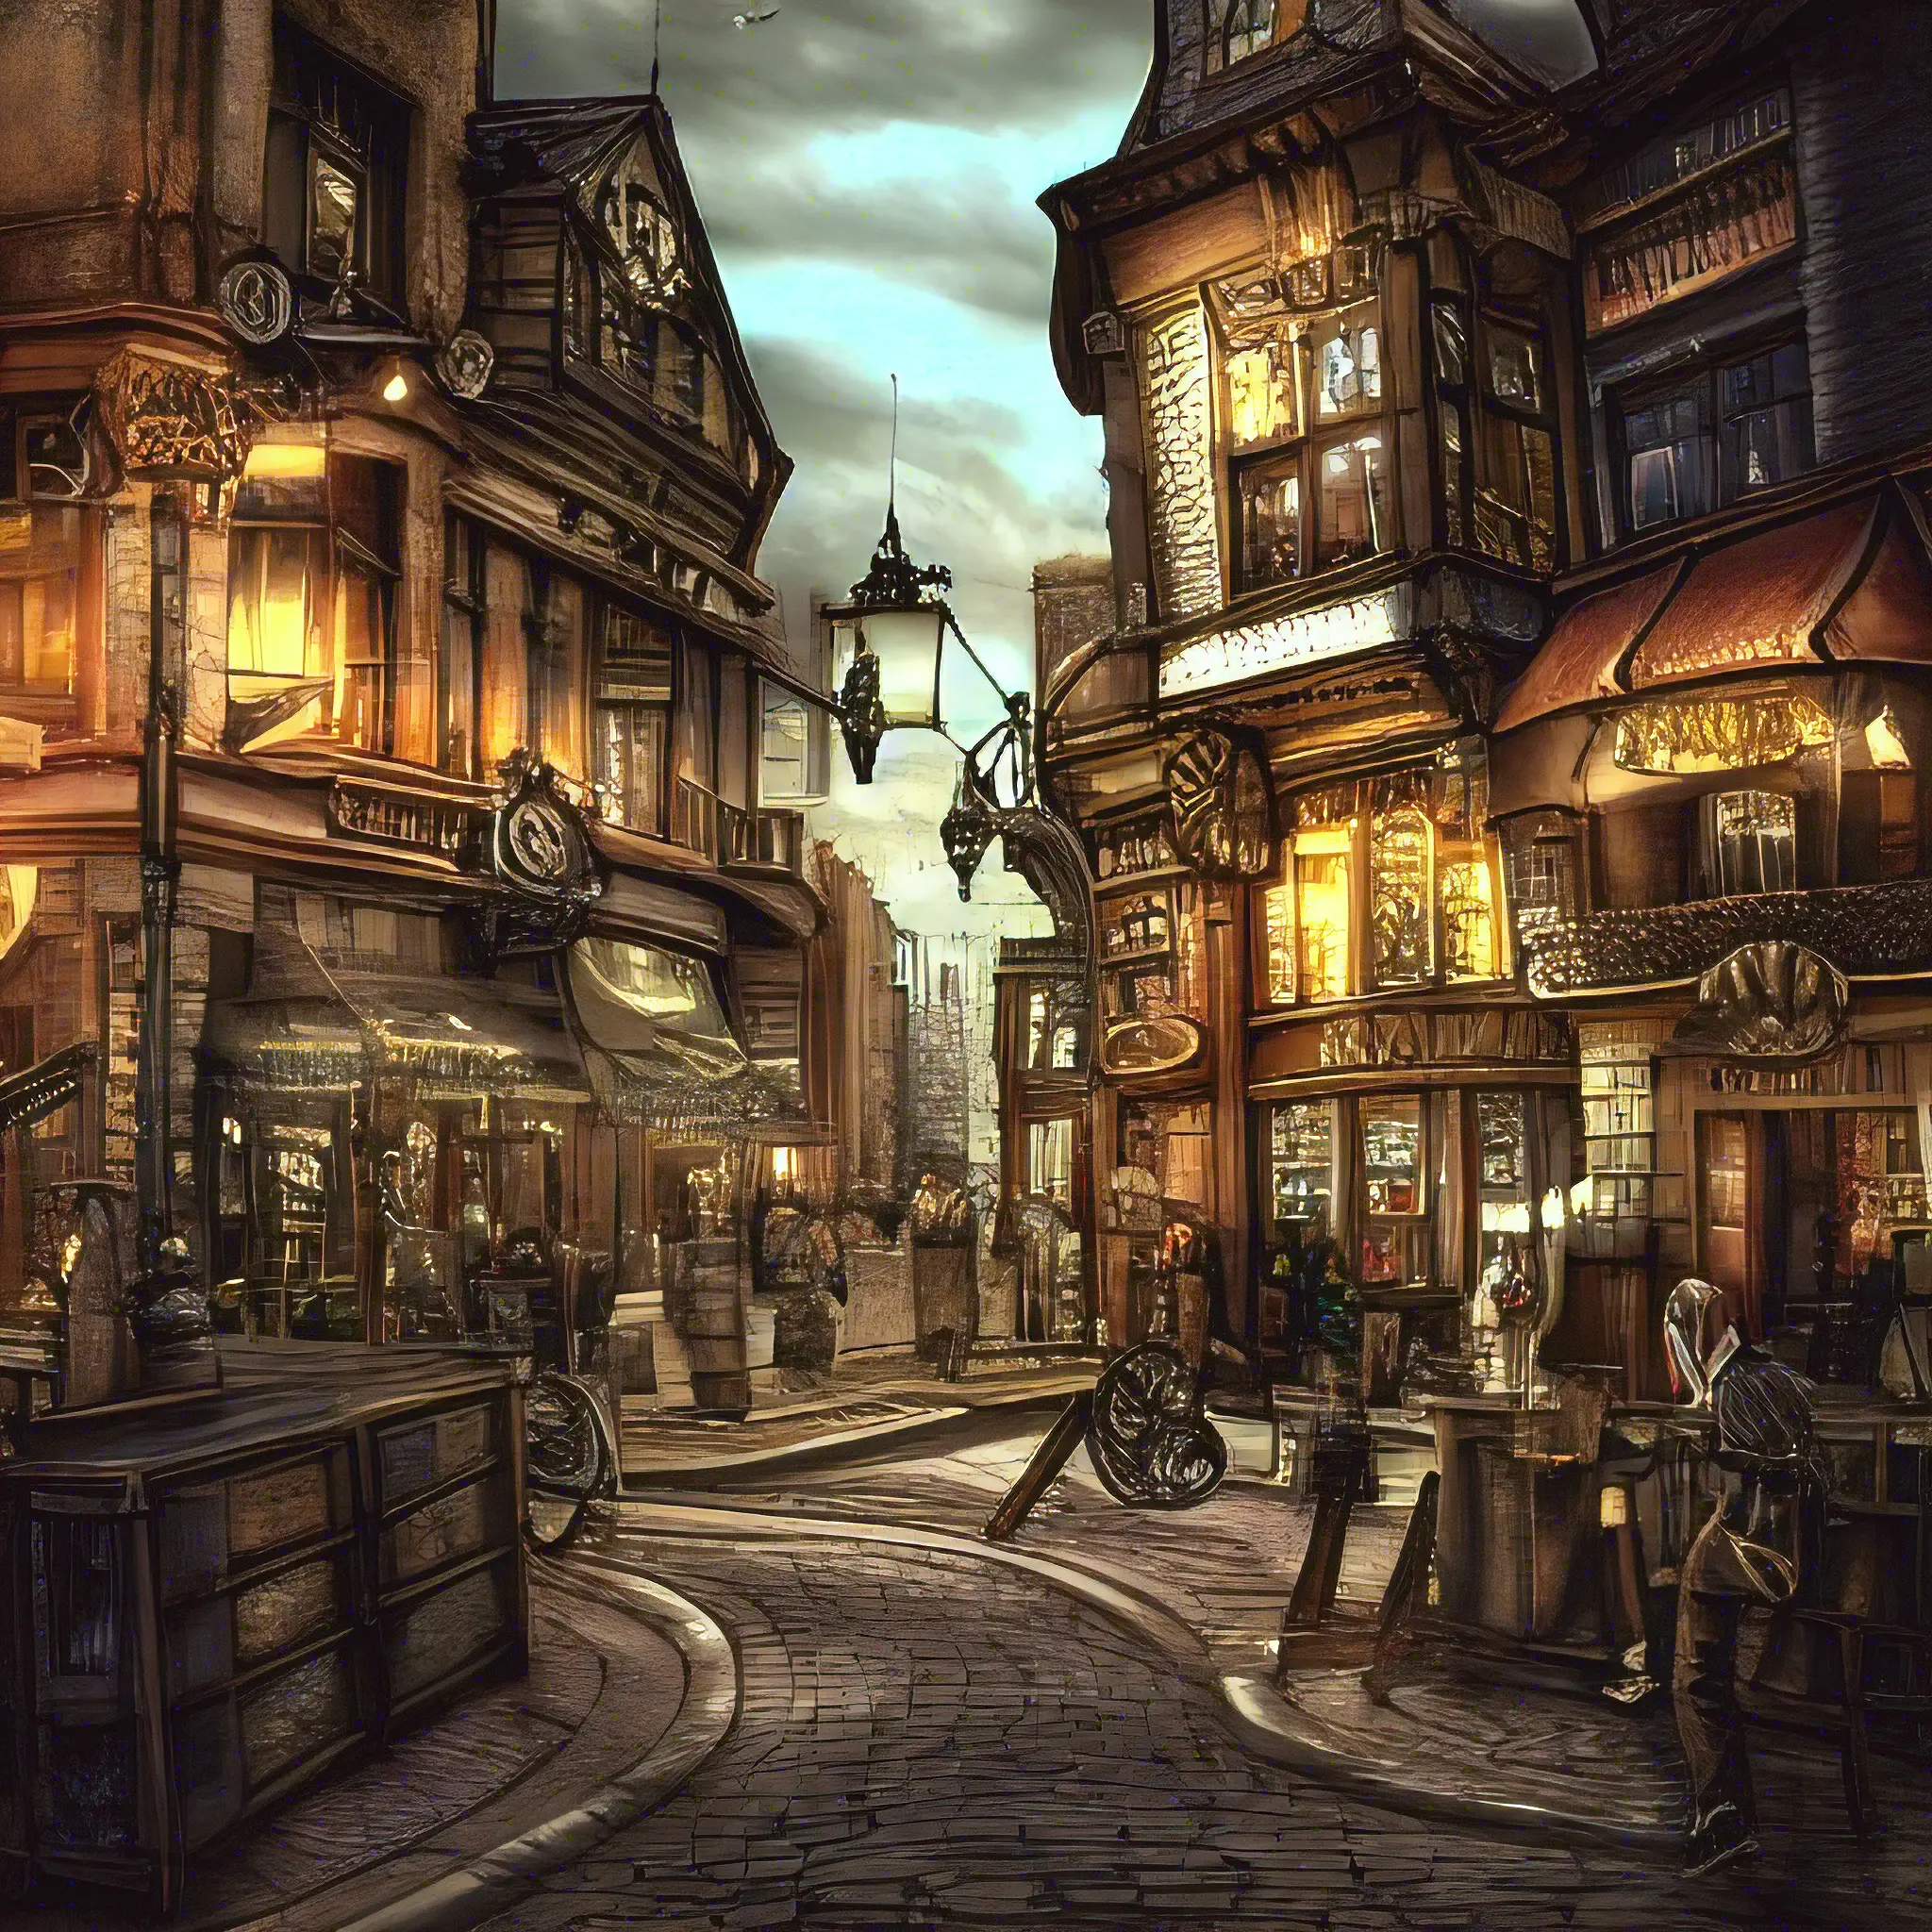 Picture of a street looking medieval with wooden houses around